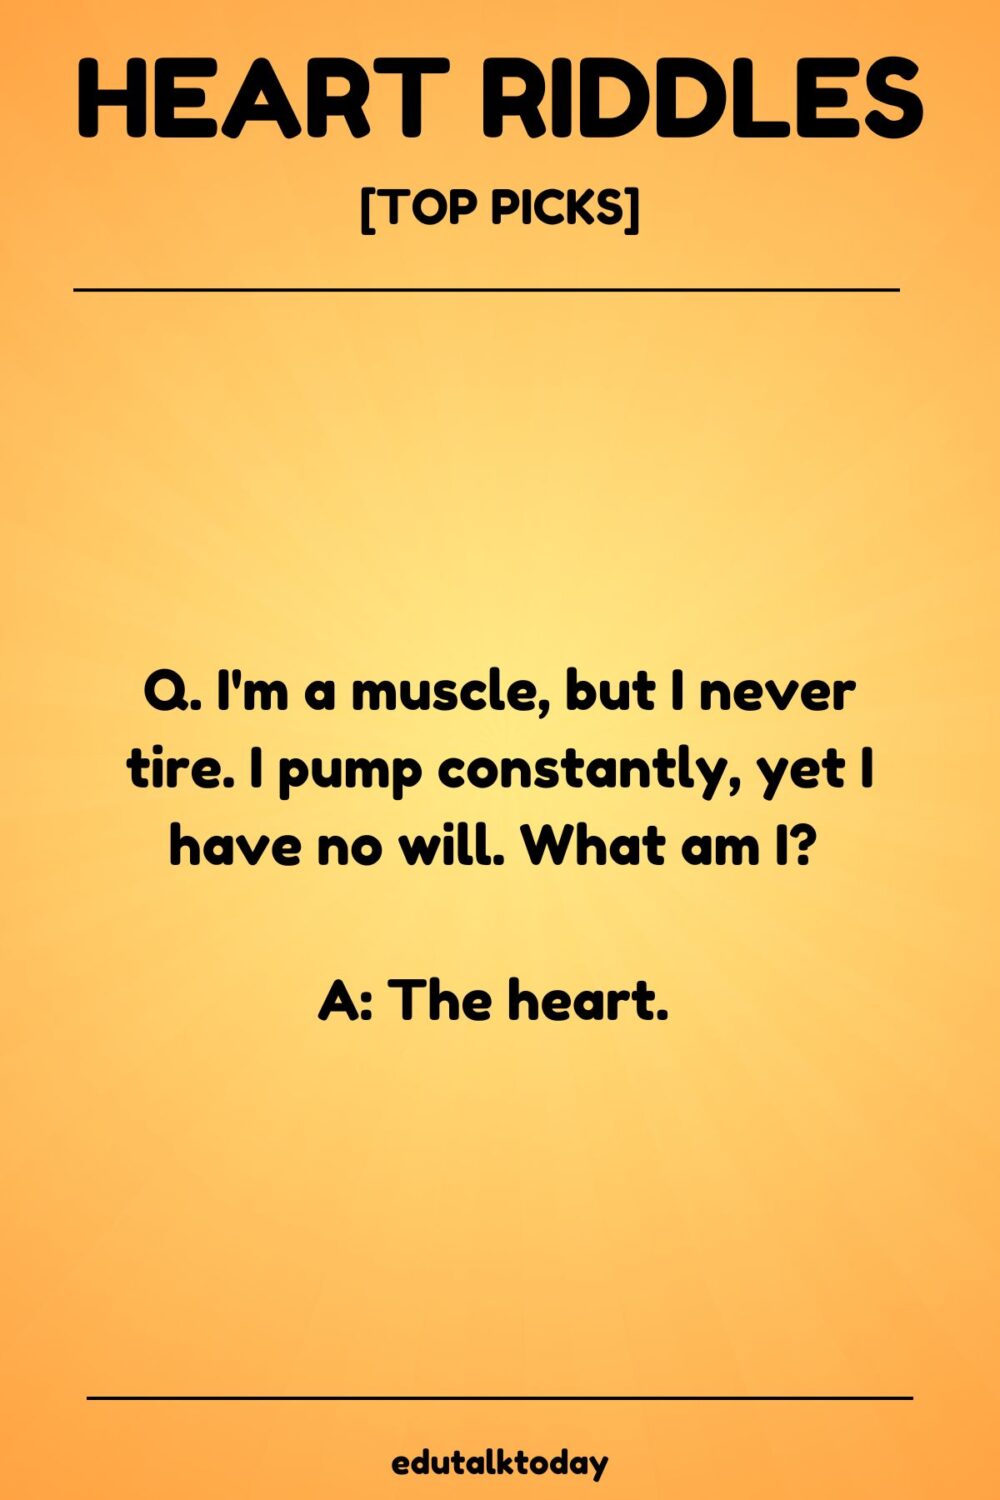 30 Heart Riddles with Answers